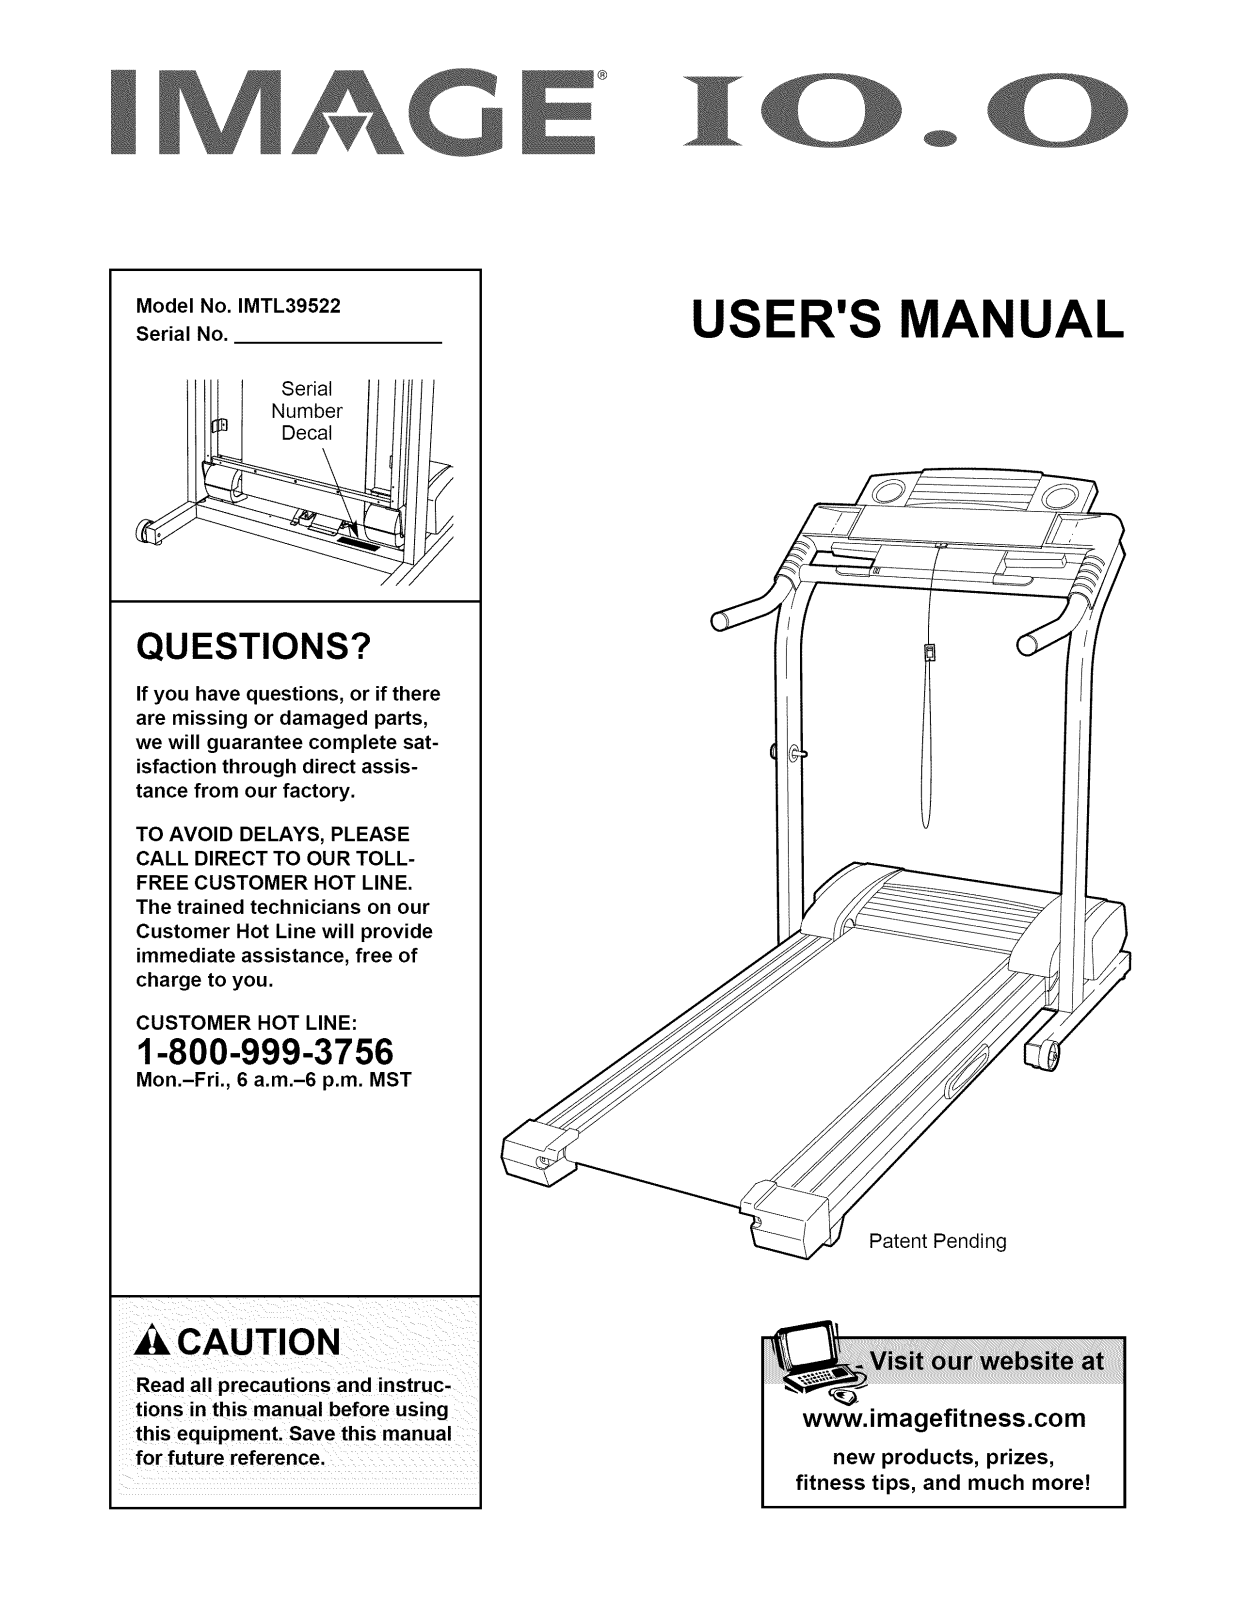 Image IMTL39522 Owner’s Manual